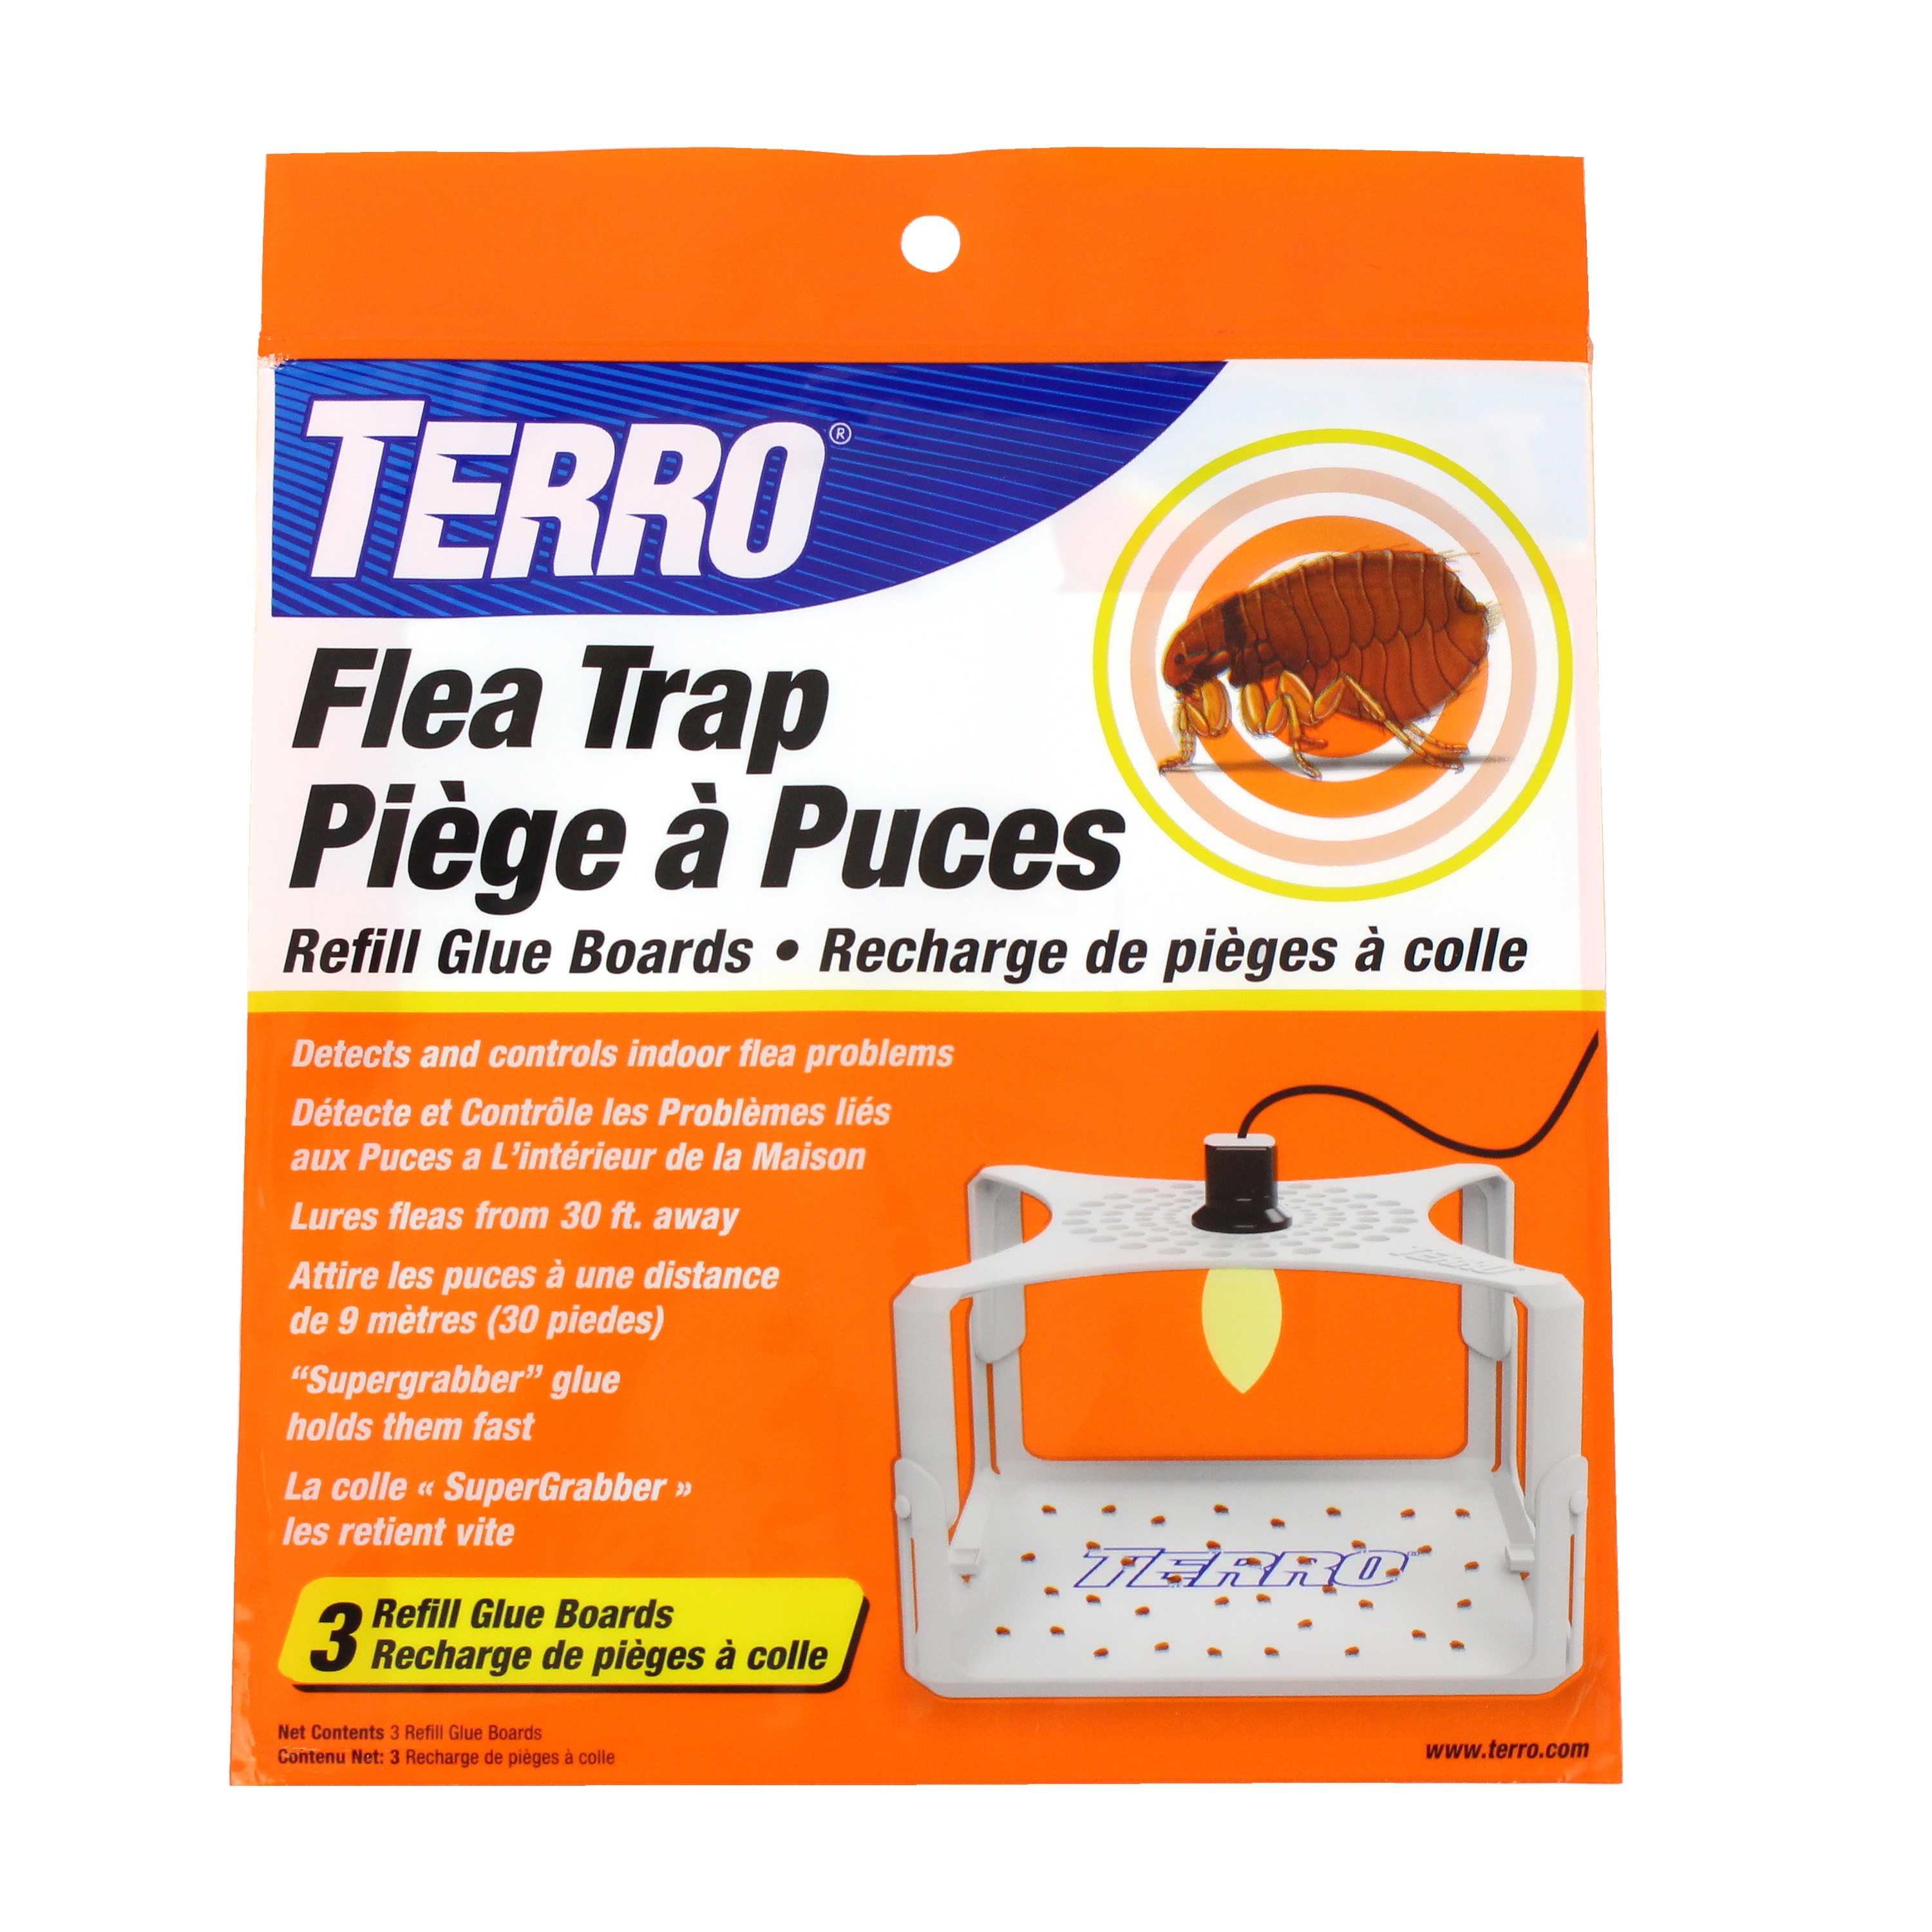 Safer Home Indoor Glue Plug-In Fly Trap Refill (3-pack)